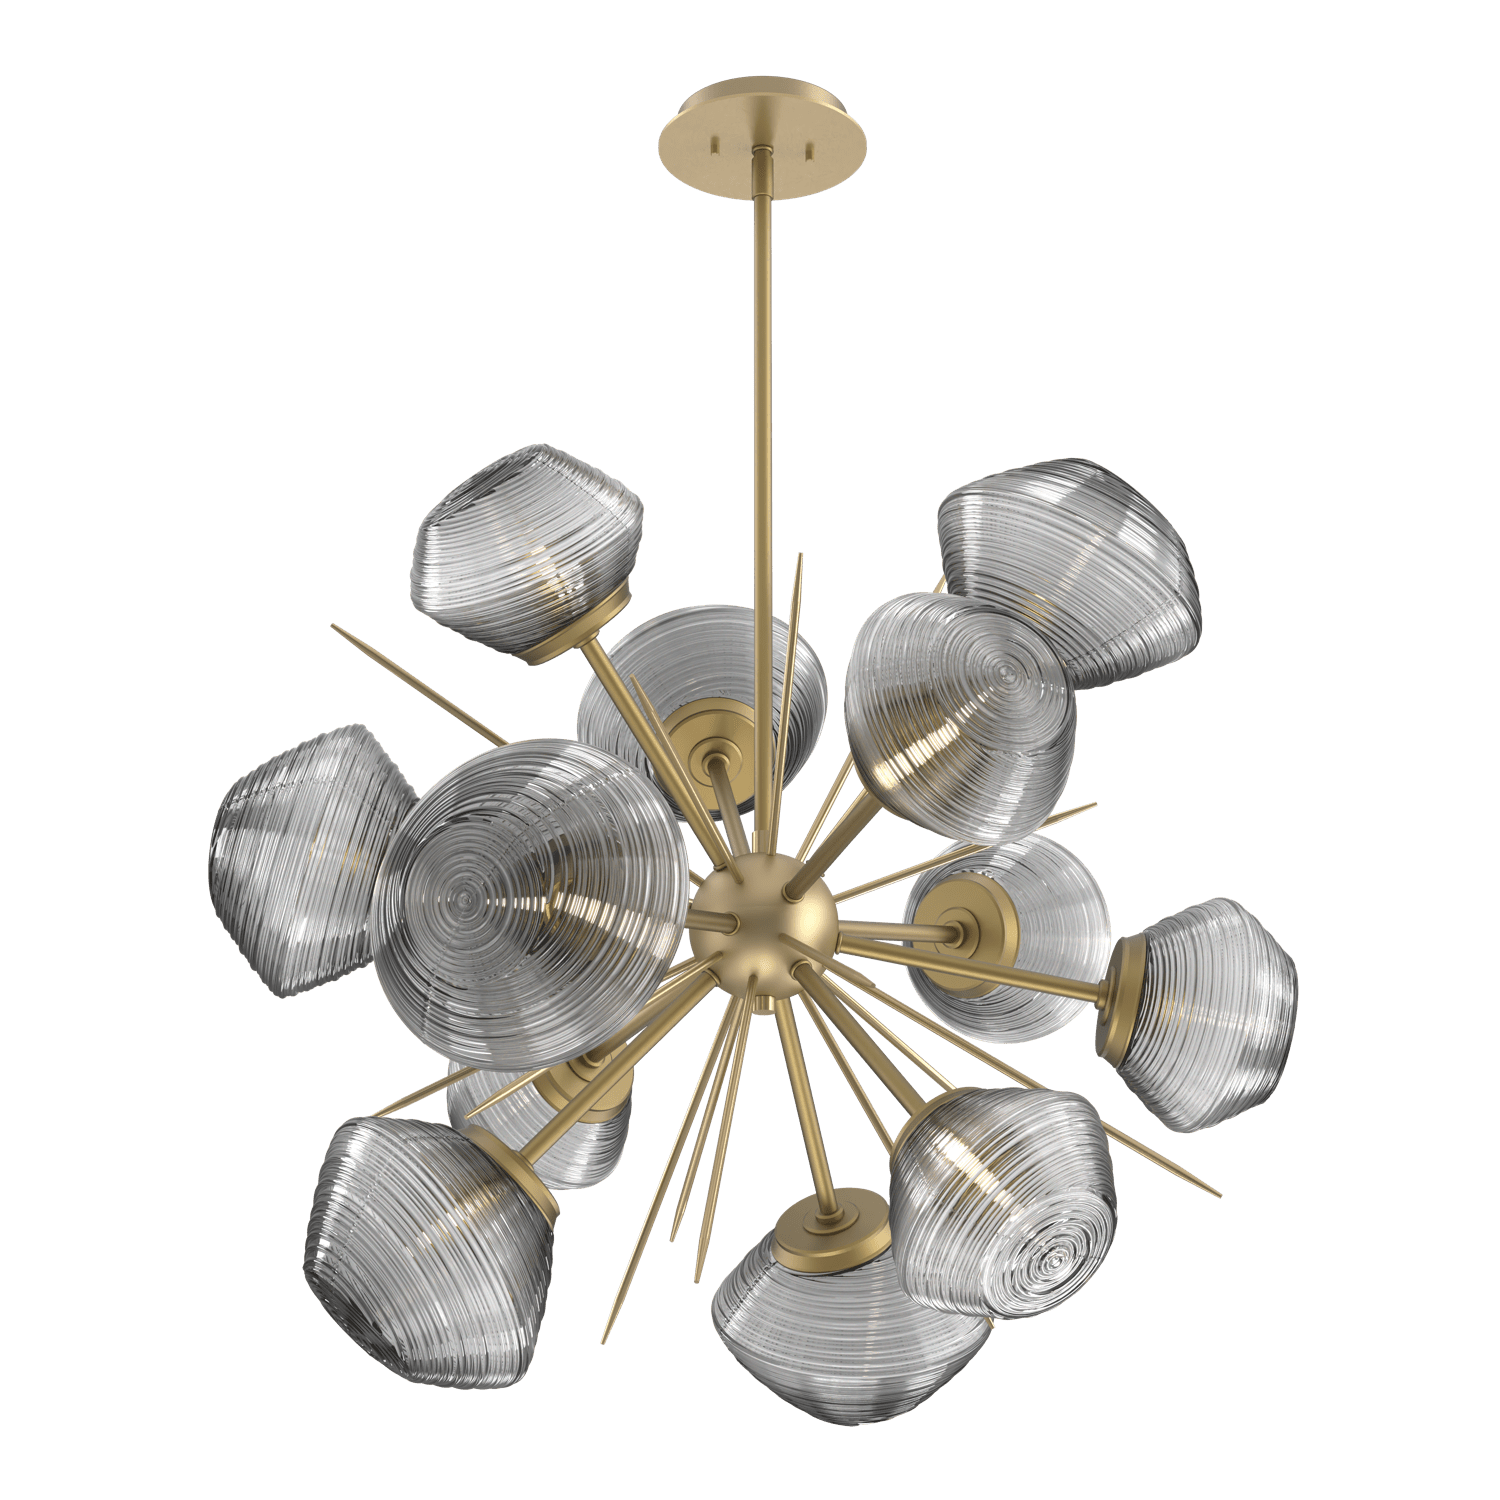 CHB0089-0G-GB-S-Hammerton-Studio-Mesa-36-inch-starburst-chandelier-with-gilded-brass-finish-and-smoke-blown-glass-shades-and-LED-lamping